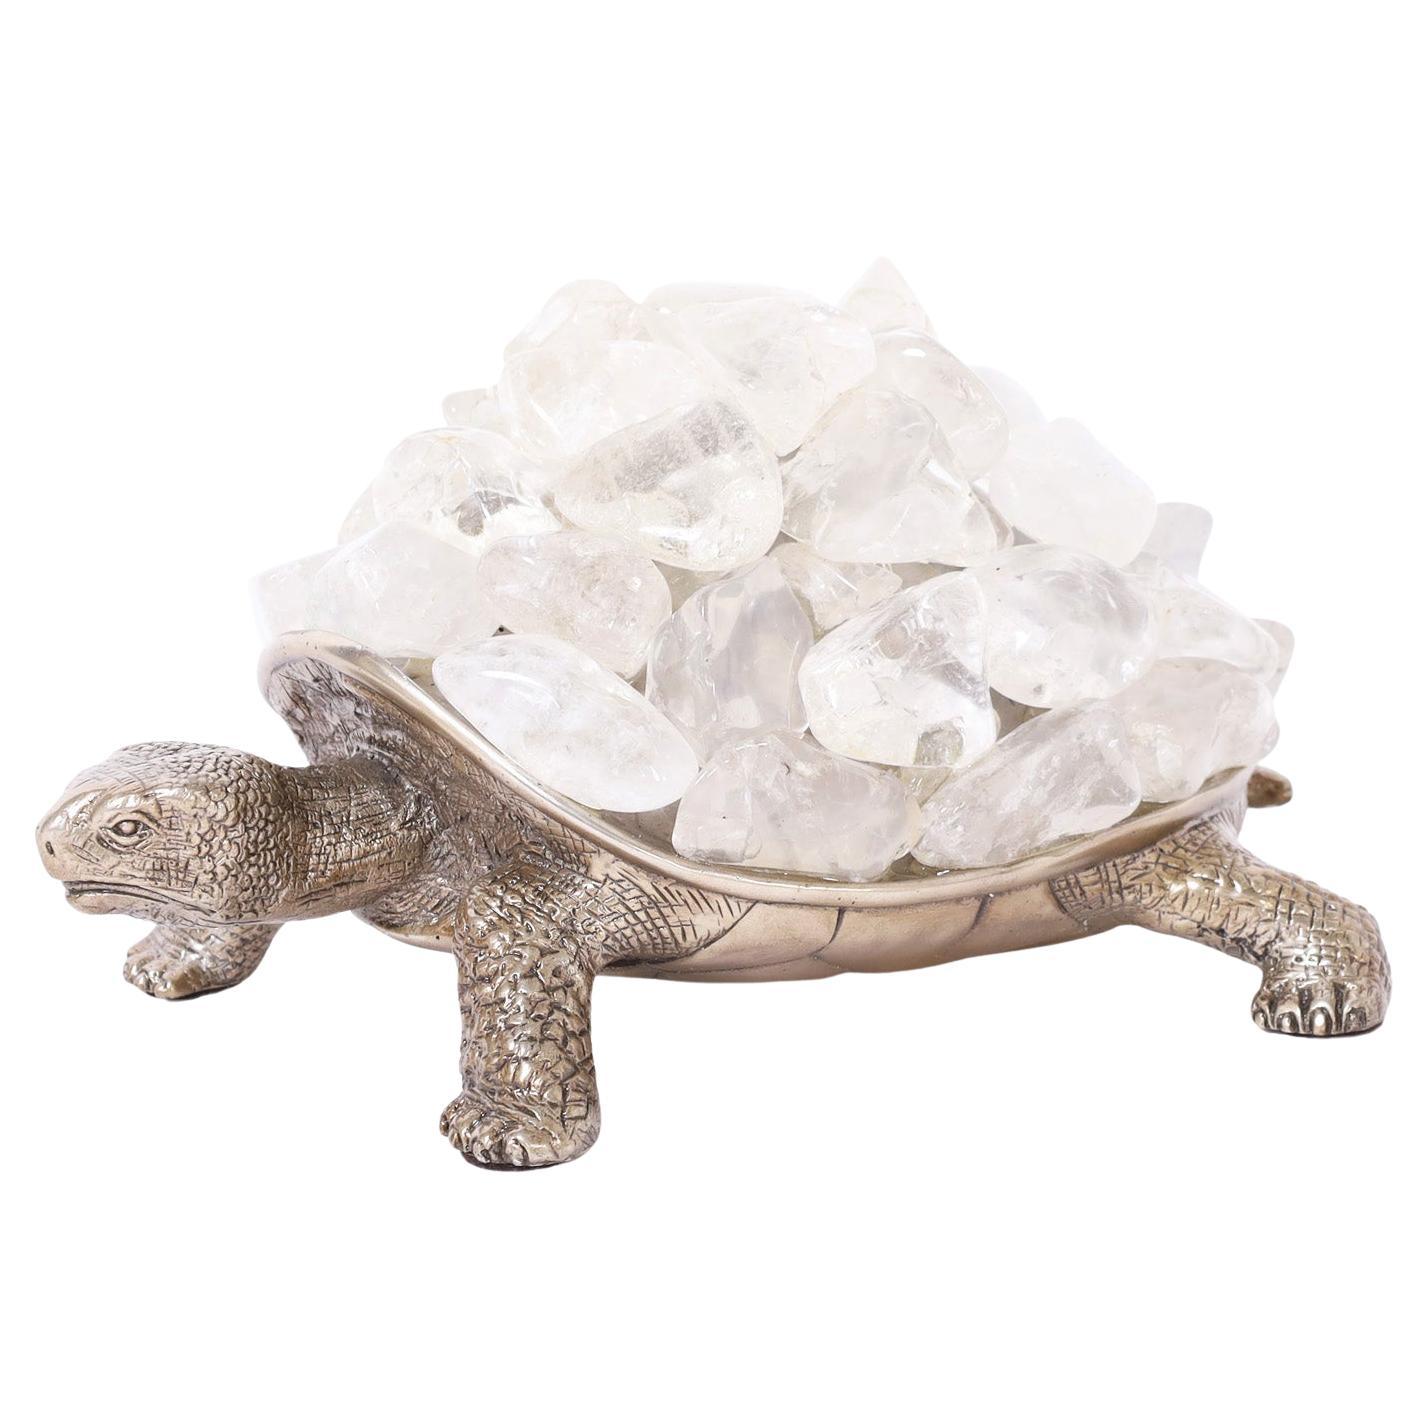 Silver Plate Turtle with Crystal Rocks For Sale